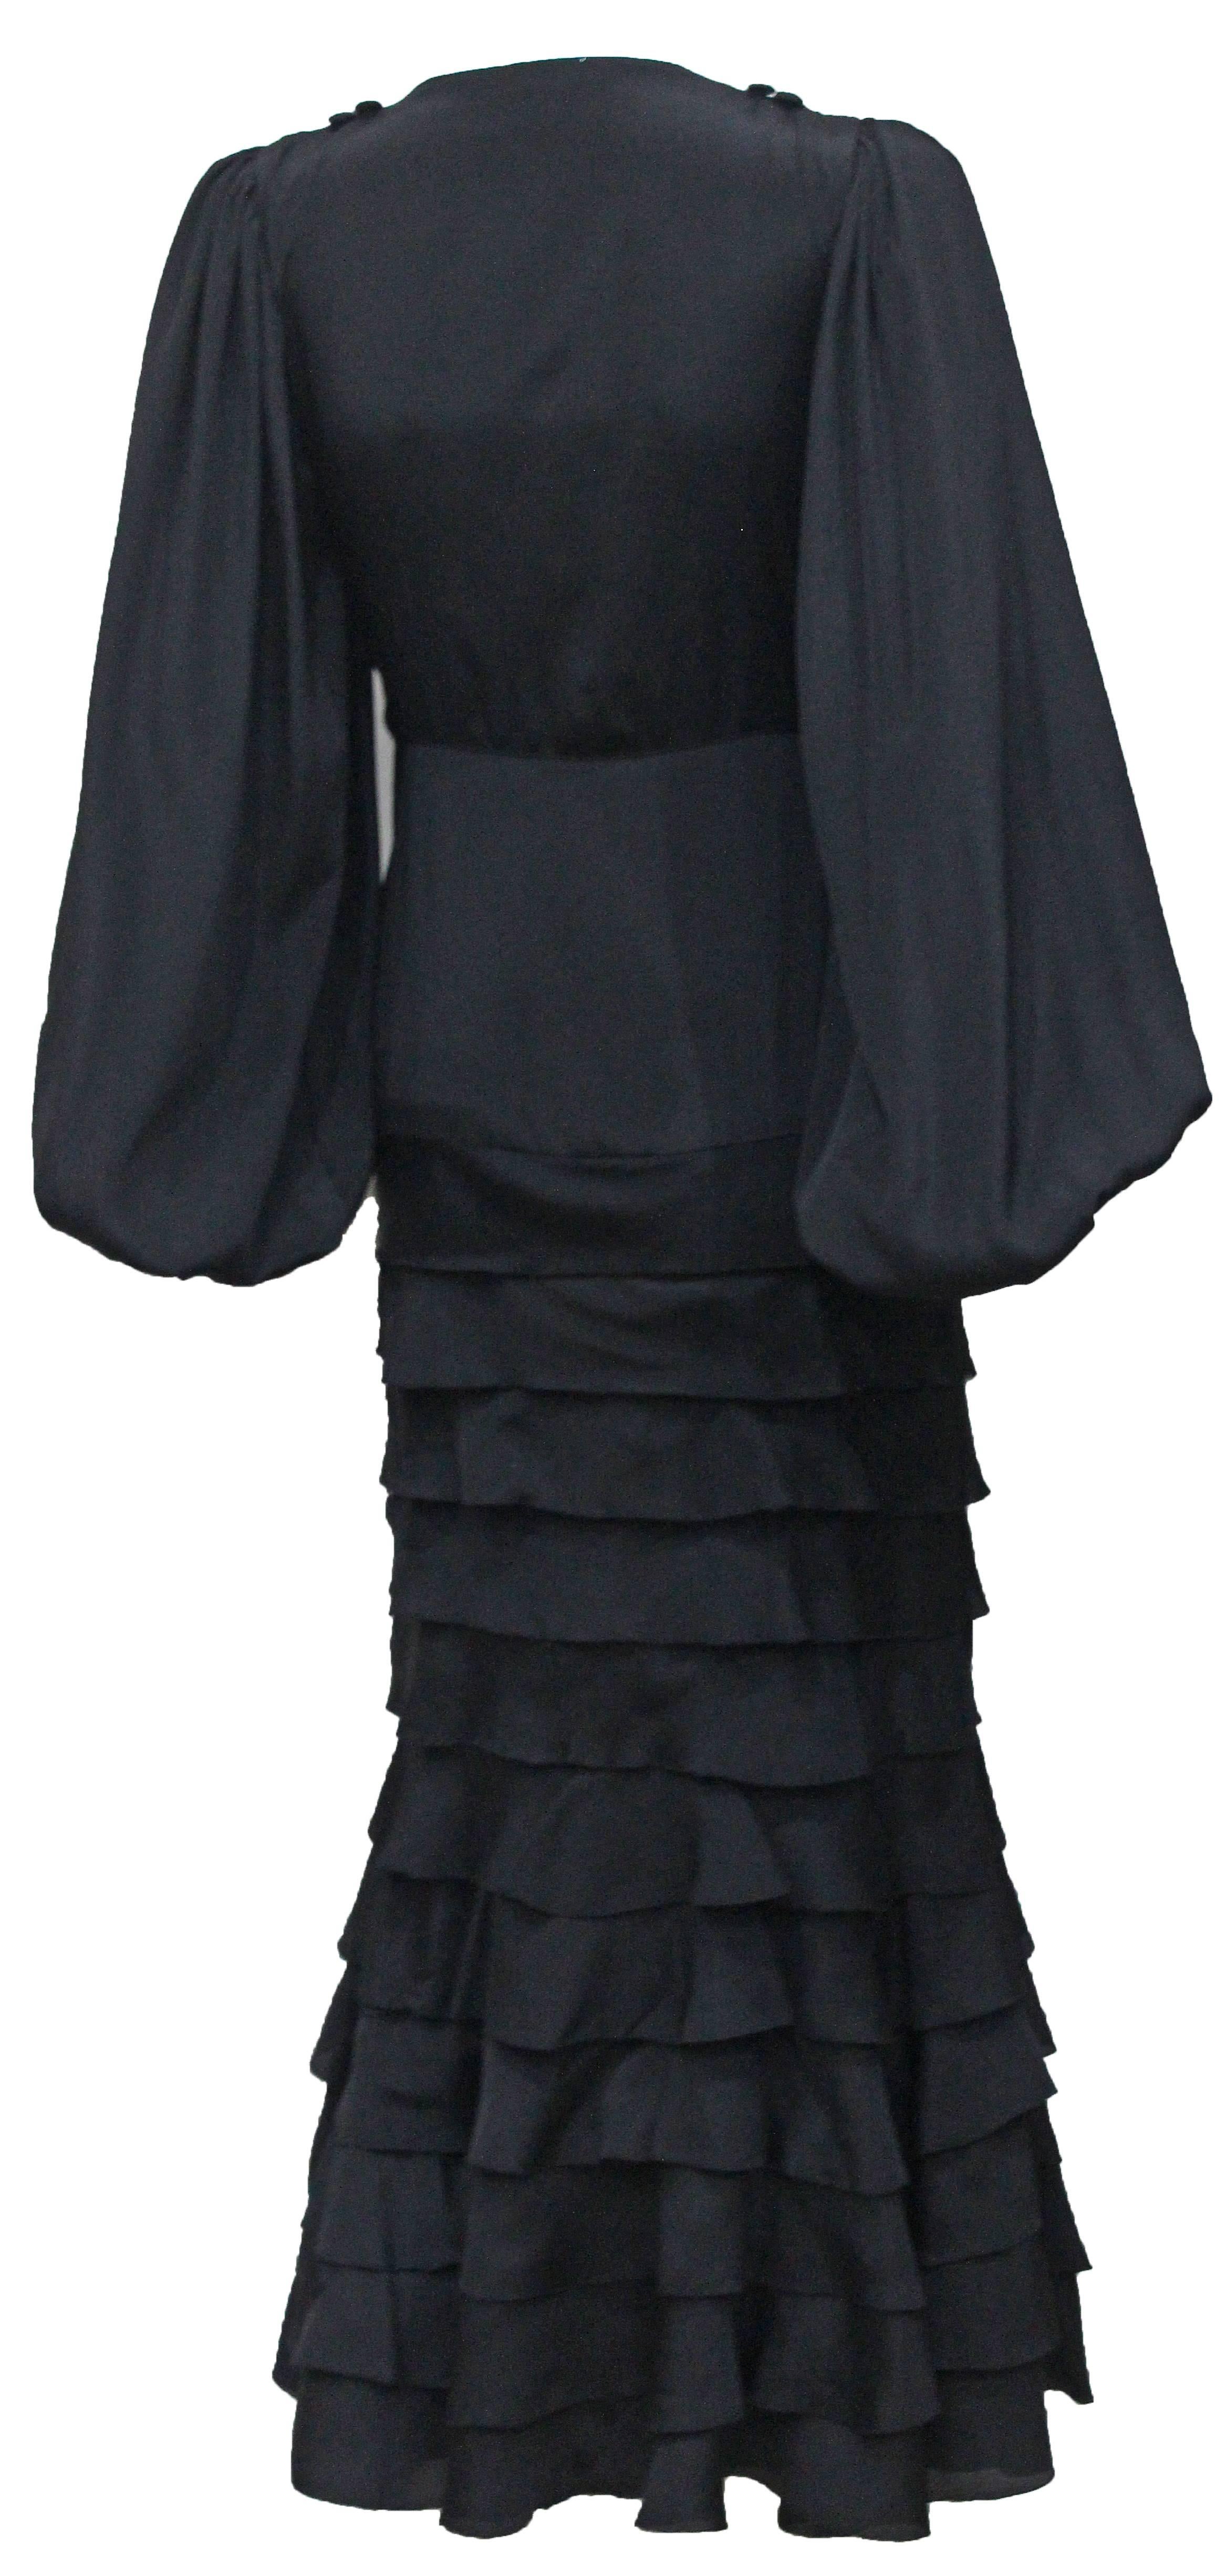 An exceptional 1940s original black silk evening gown with layered ruffled skirt and billowing poet sleeves. Hidden side closure.

Size: XS - Approx. UK 4-6 / Fr 32-34 / XXS - XS

Amazing condition